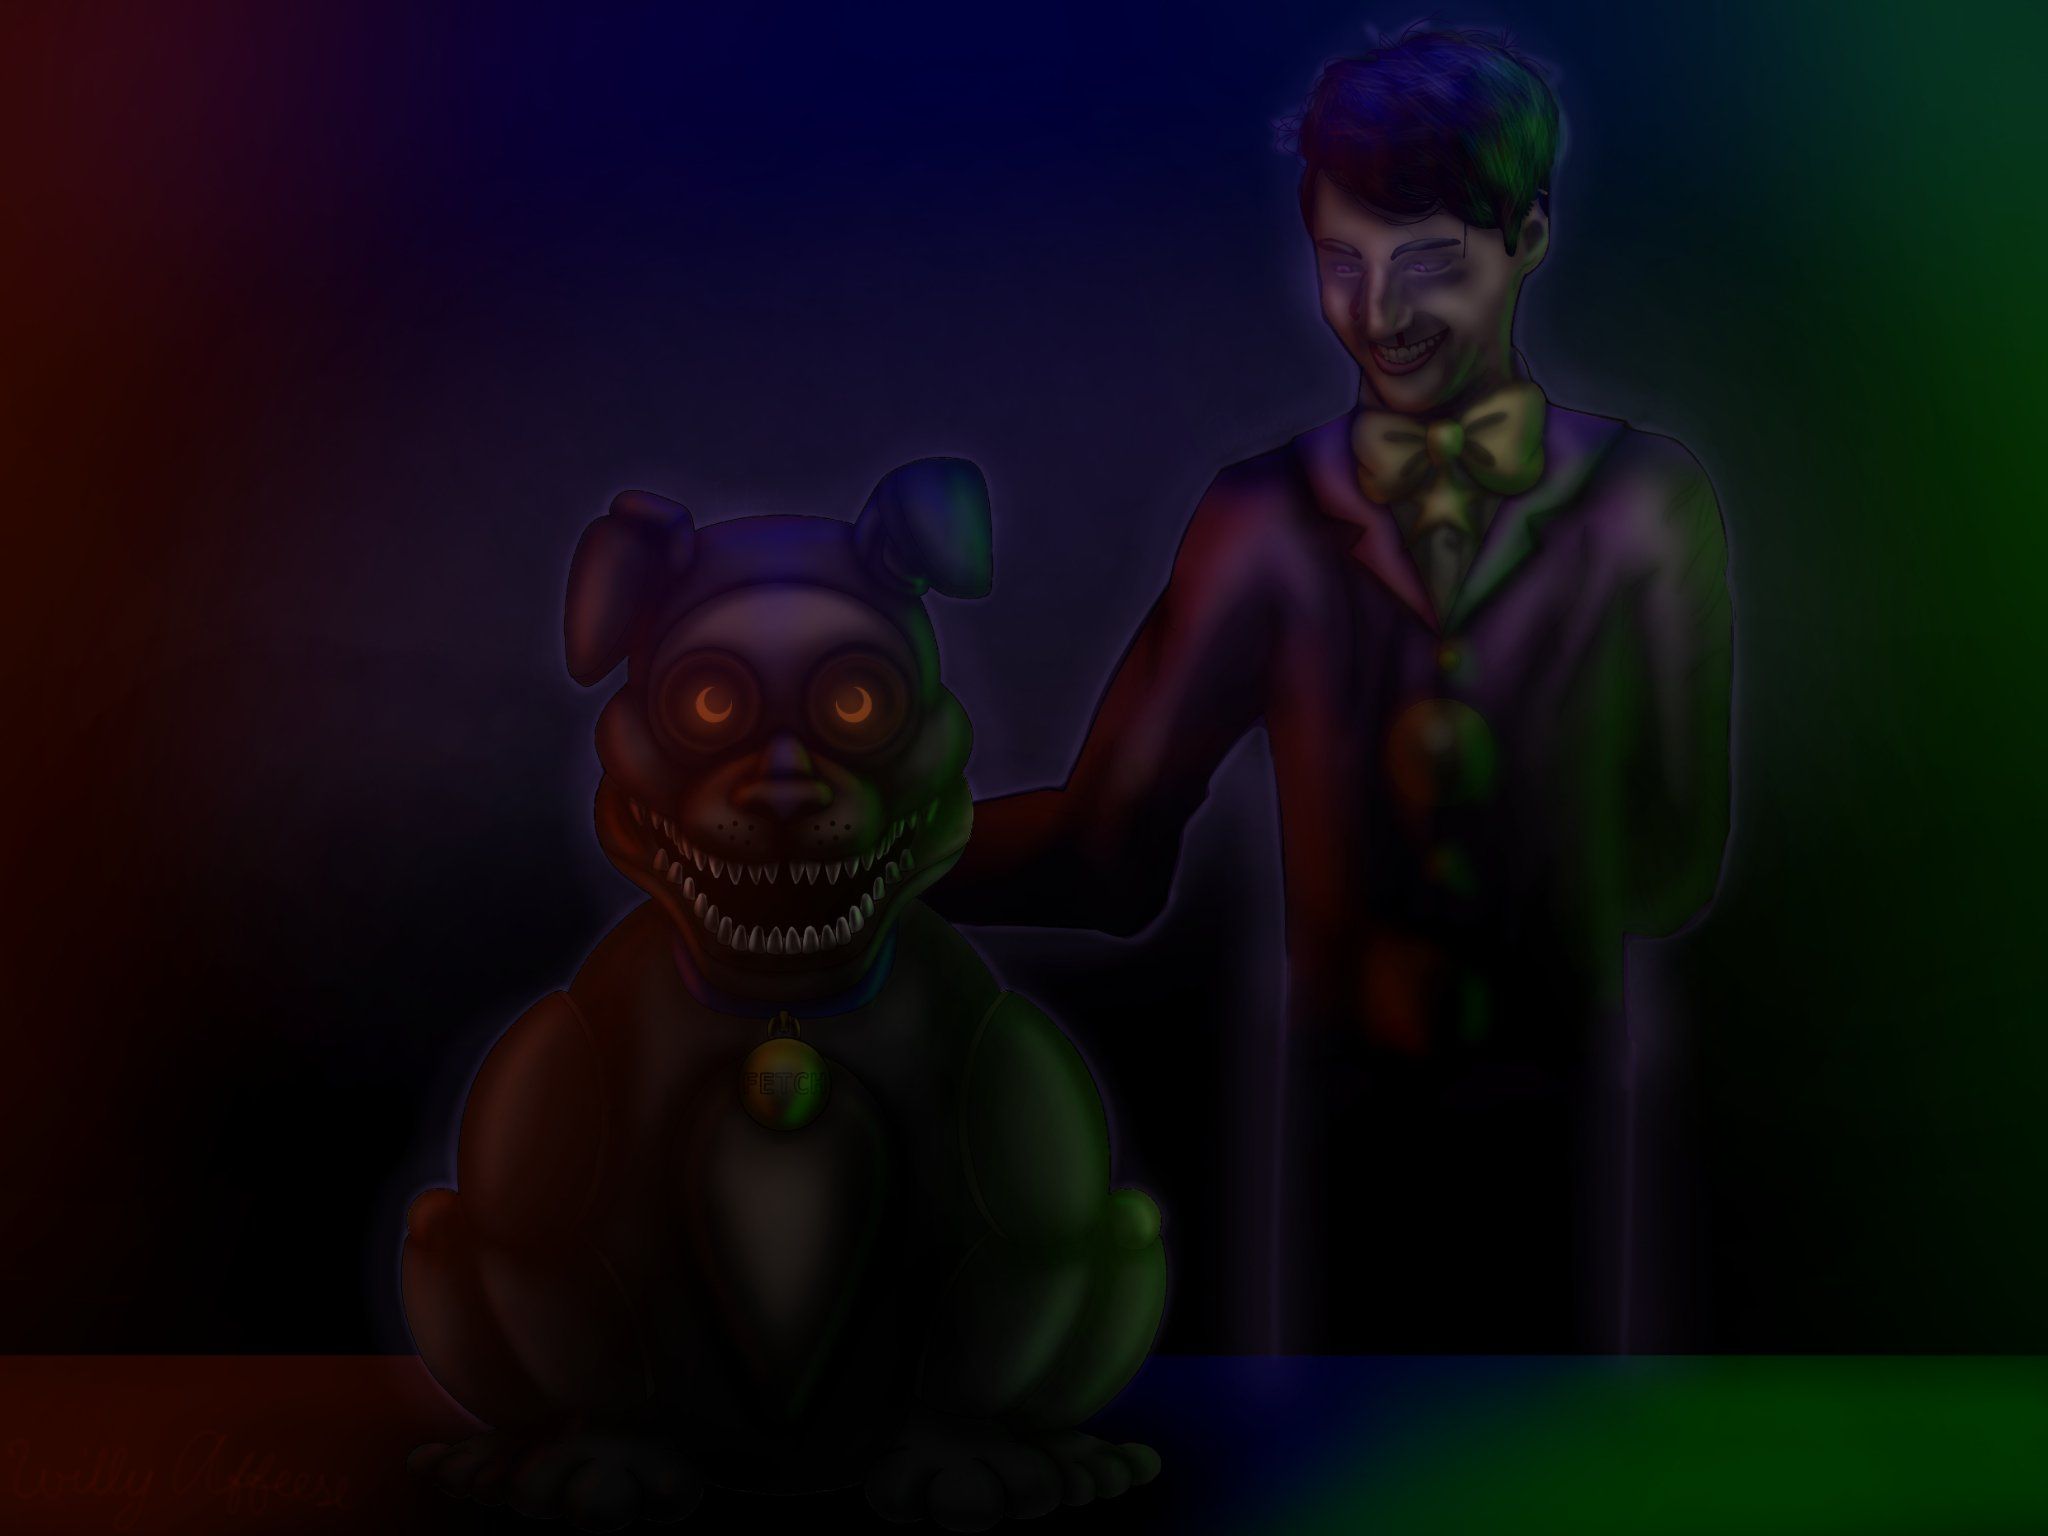 Willy Affeese there! I remember Dawko saying “Fetch is misunderstood, he's cute”. I had to do it. Have a nice day! Who's on this art: Fetch FNAF